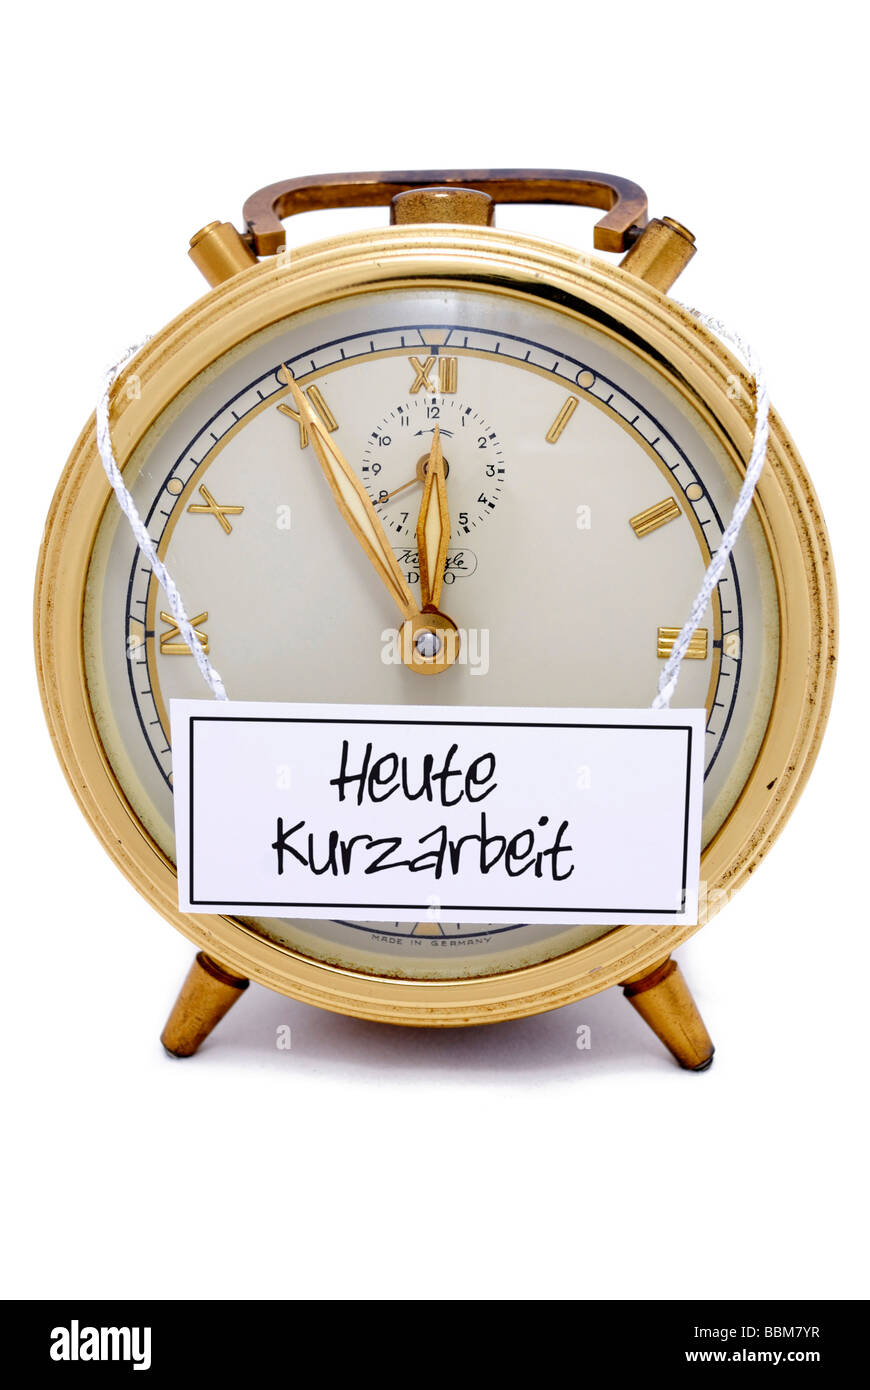 Alarm clock, 5 to 12, 'Heute Kurzarbeit', German for: today short-time work, written on a sign Stock Photo